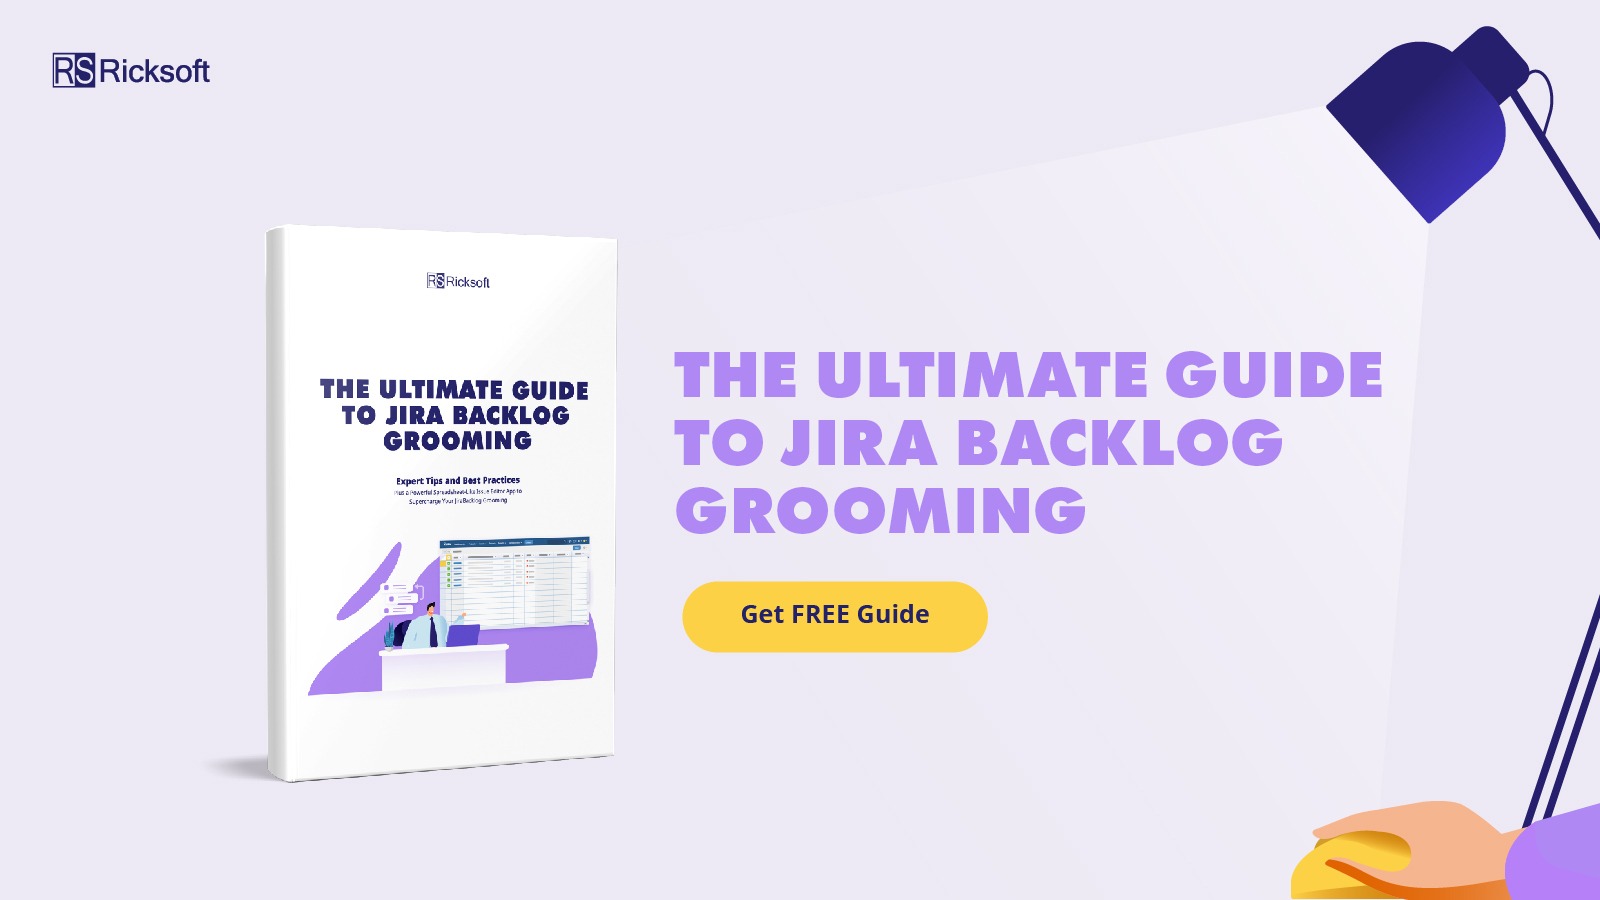 Download the free e-book to learn how to effectively groom your Jira backlog.